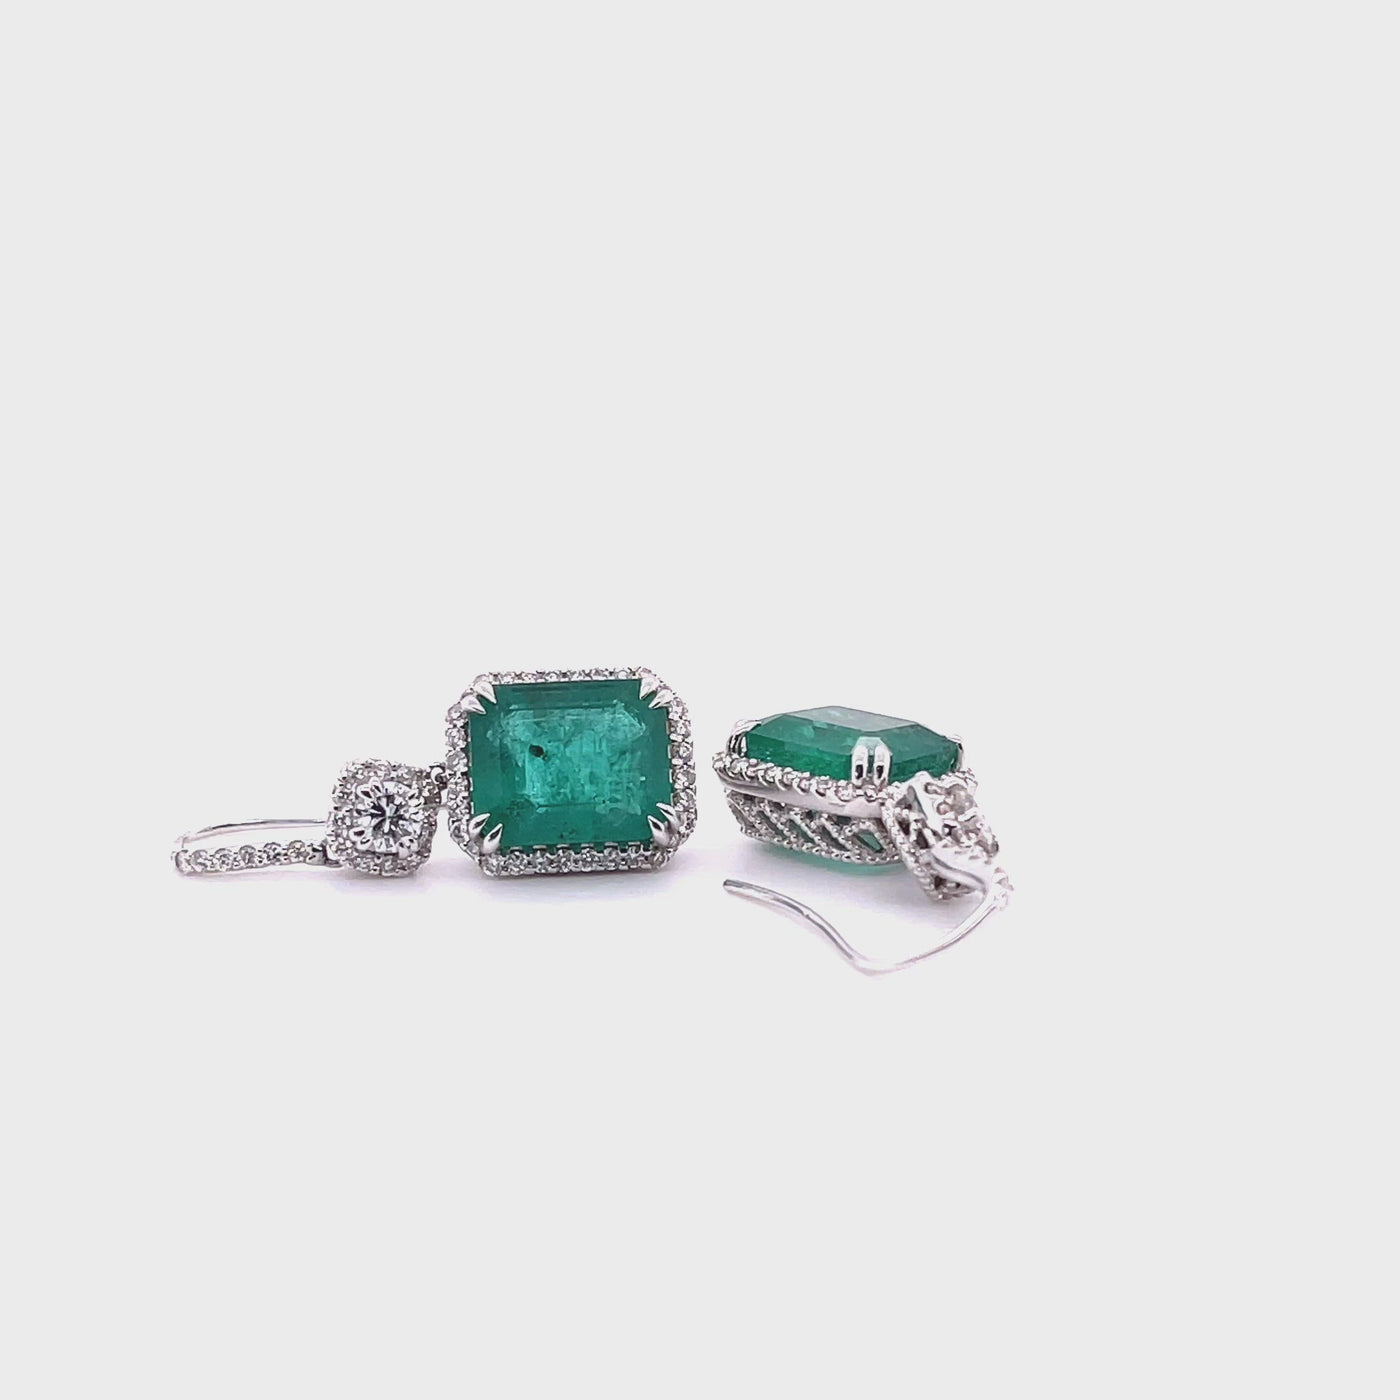 18CT White Gold Emerald and Diamond Earrings